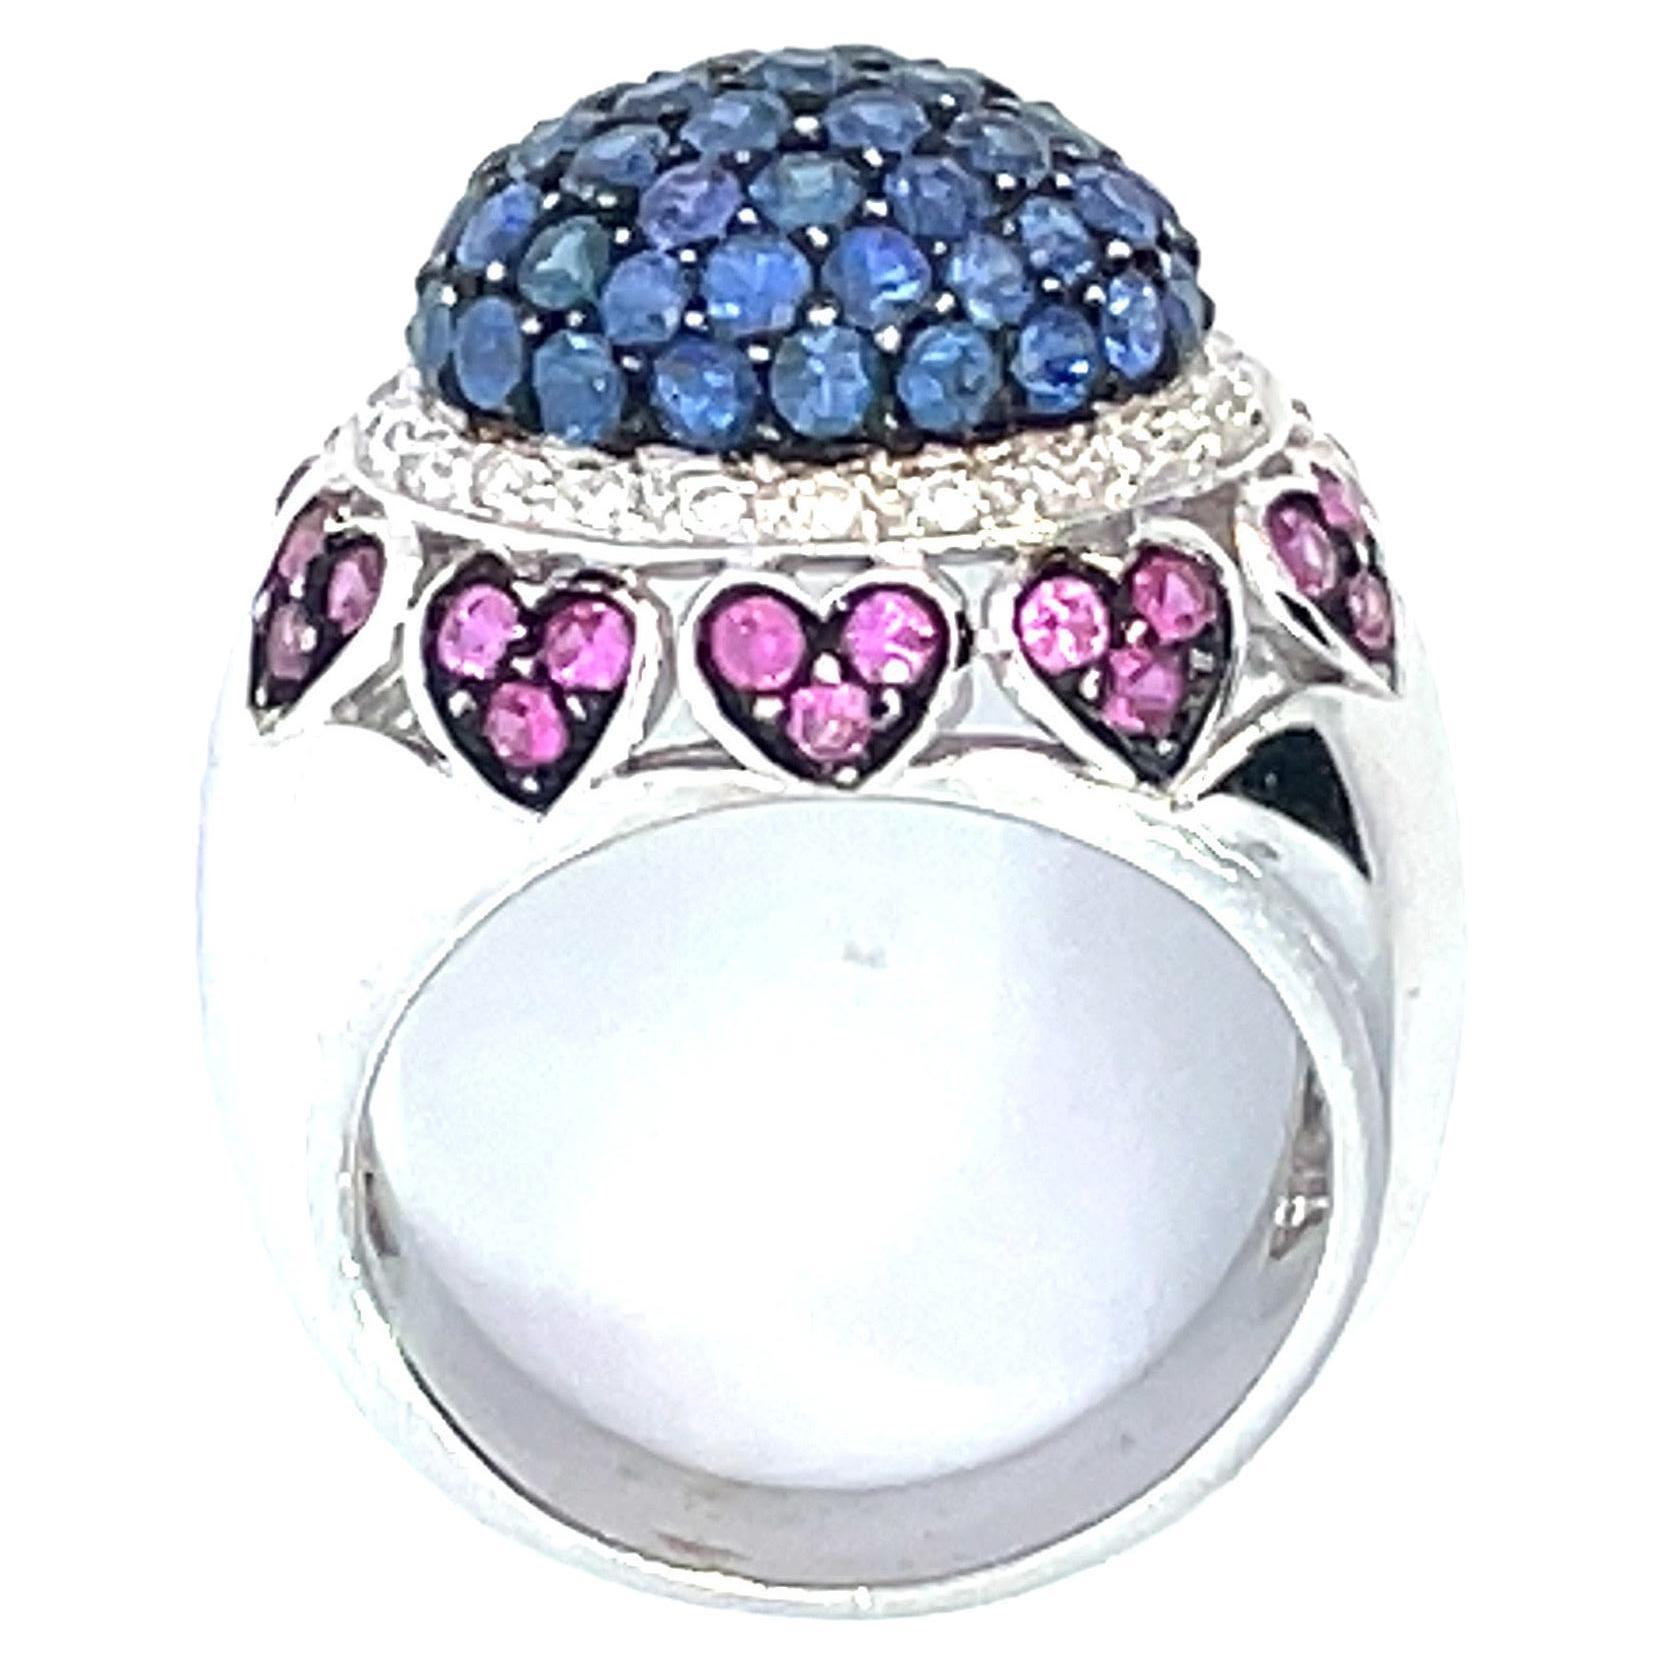 Pavé Dome Ring with Natural Blue & Pink Sapphires & Diamonds in 18kt White Gold